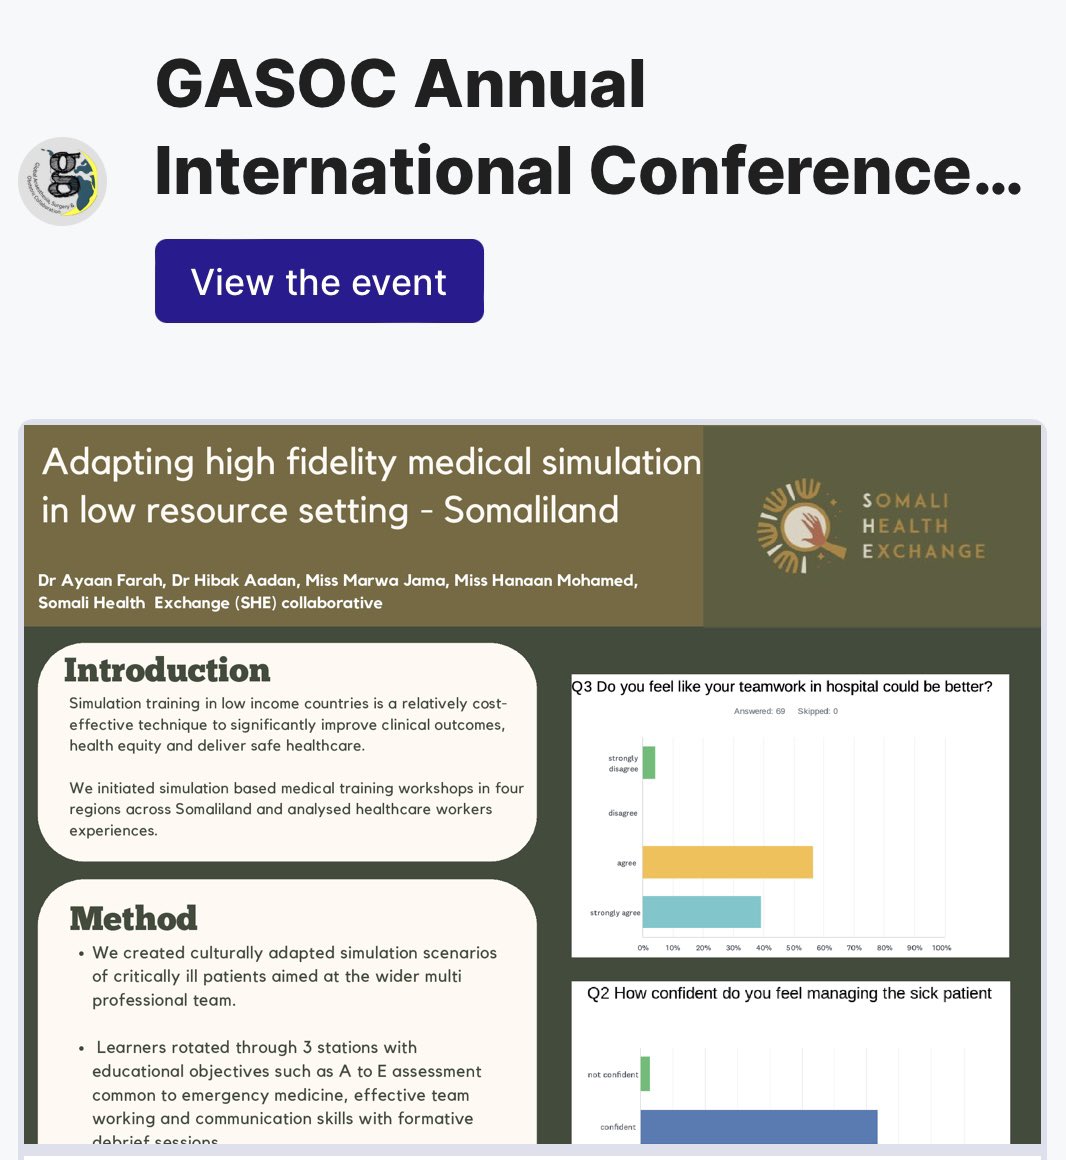 Check out our poster at #GASOC Annual International Conference 2023: Health Equity in Global Surgery
 share.medall.org/posters/a2b23f…
#Somaliland  #GlobalHealth #SafeSurgery #MaternalCare #HealthForAll #HealthTech #AfricaHealth #GlobalCitizenFestival @BlavatnikSchool @GASOC_2015